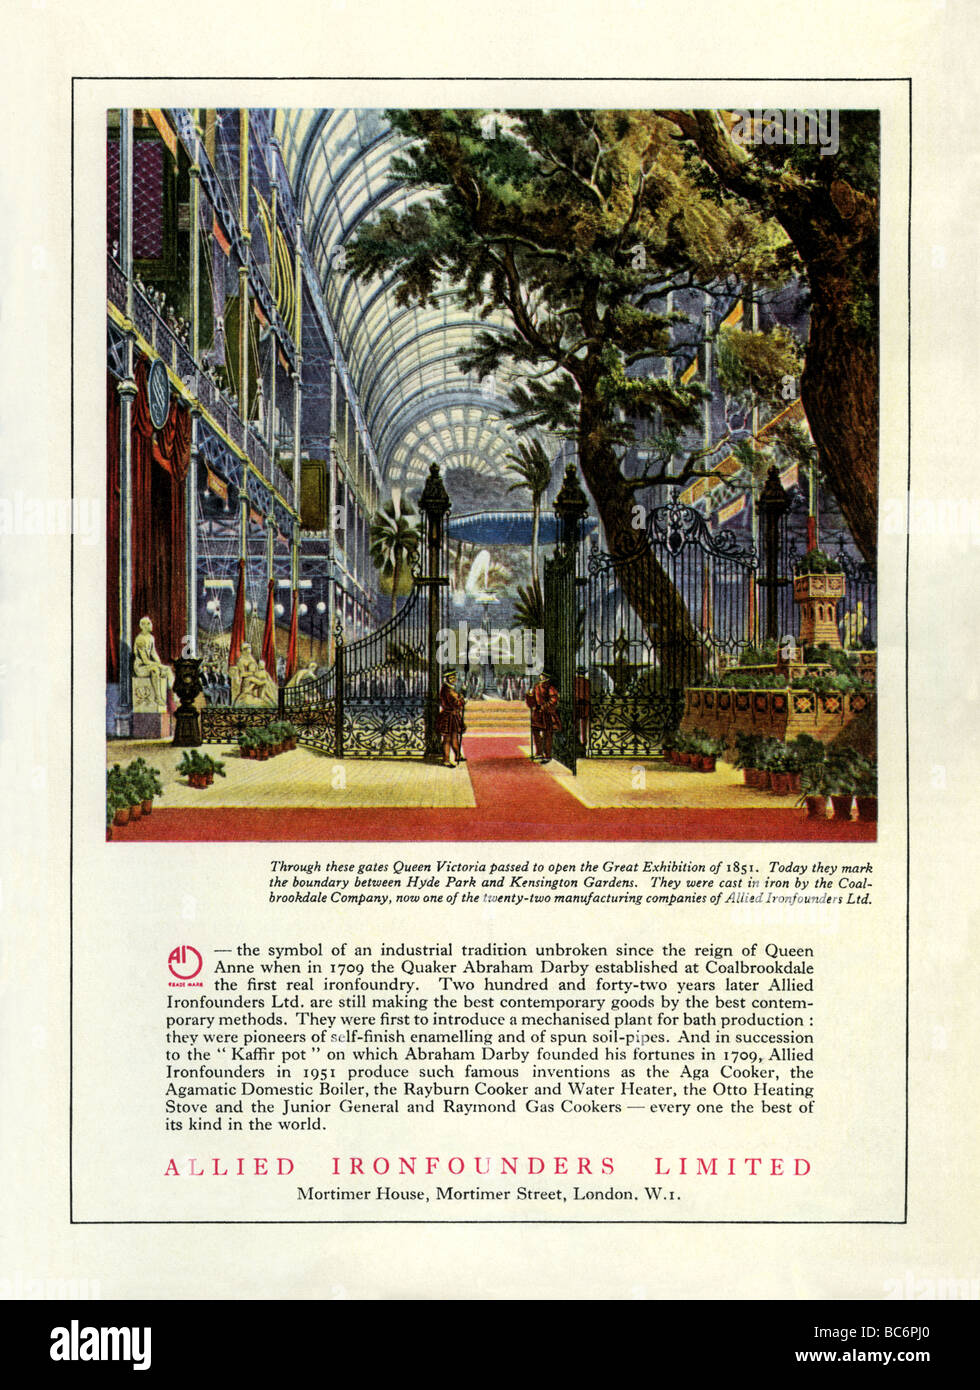 1951 colour advertisement for Allied Ironfounders featuring illustration of Paxton's Hyde Park Great Exhibition Hall of 1851 Stock Photo